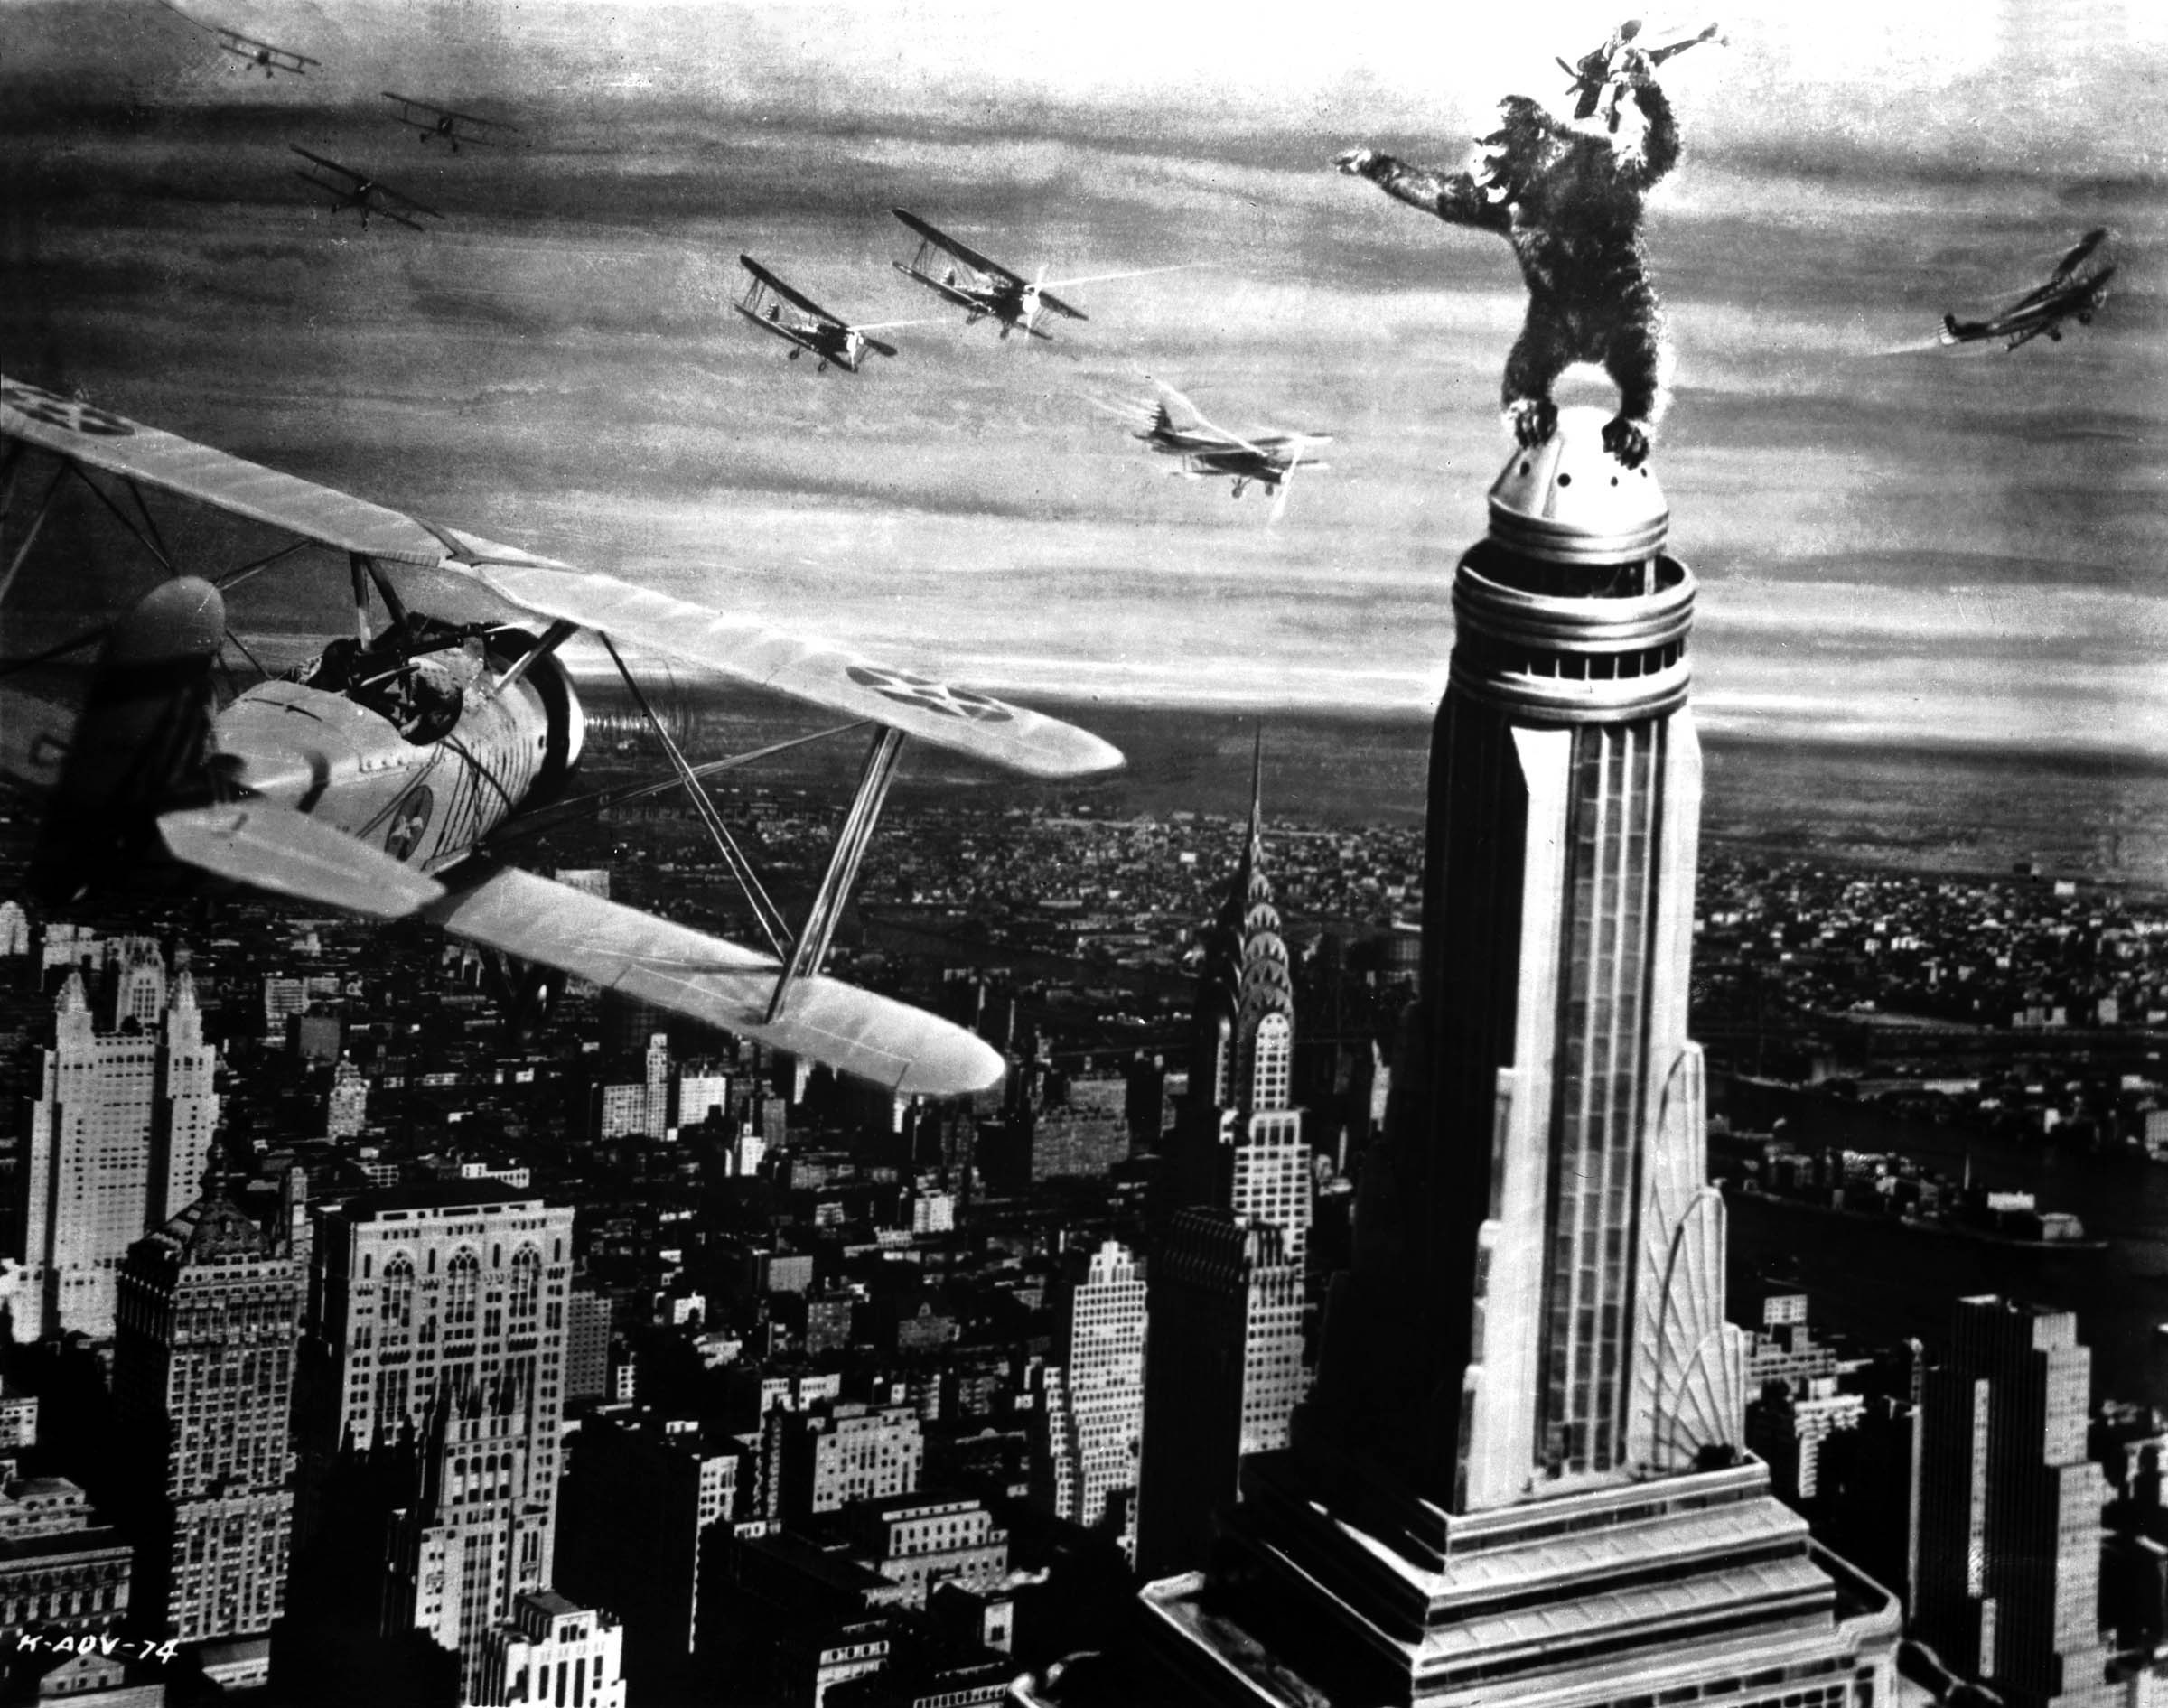 King Kong (1933) - Probably the most famous monster movie of all time, this was the first real “blockbuster”. Carl Denham travels to far away islands to make travel films when he encounters Kong, a massive ape that is worship by the island people. Kong is sedated and brought to New York City, this is where one of the most iconic scenes in film history takes place. 